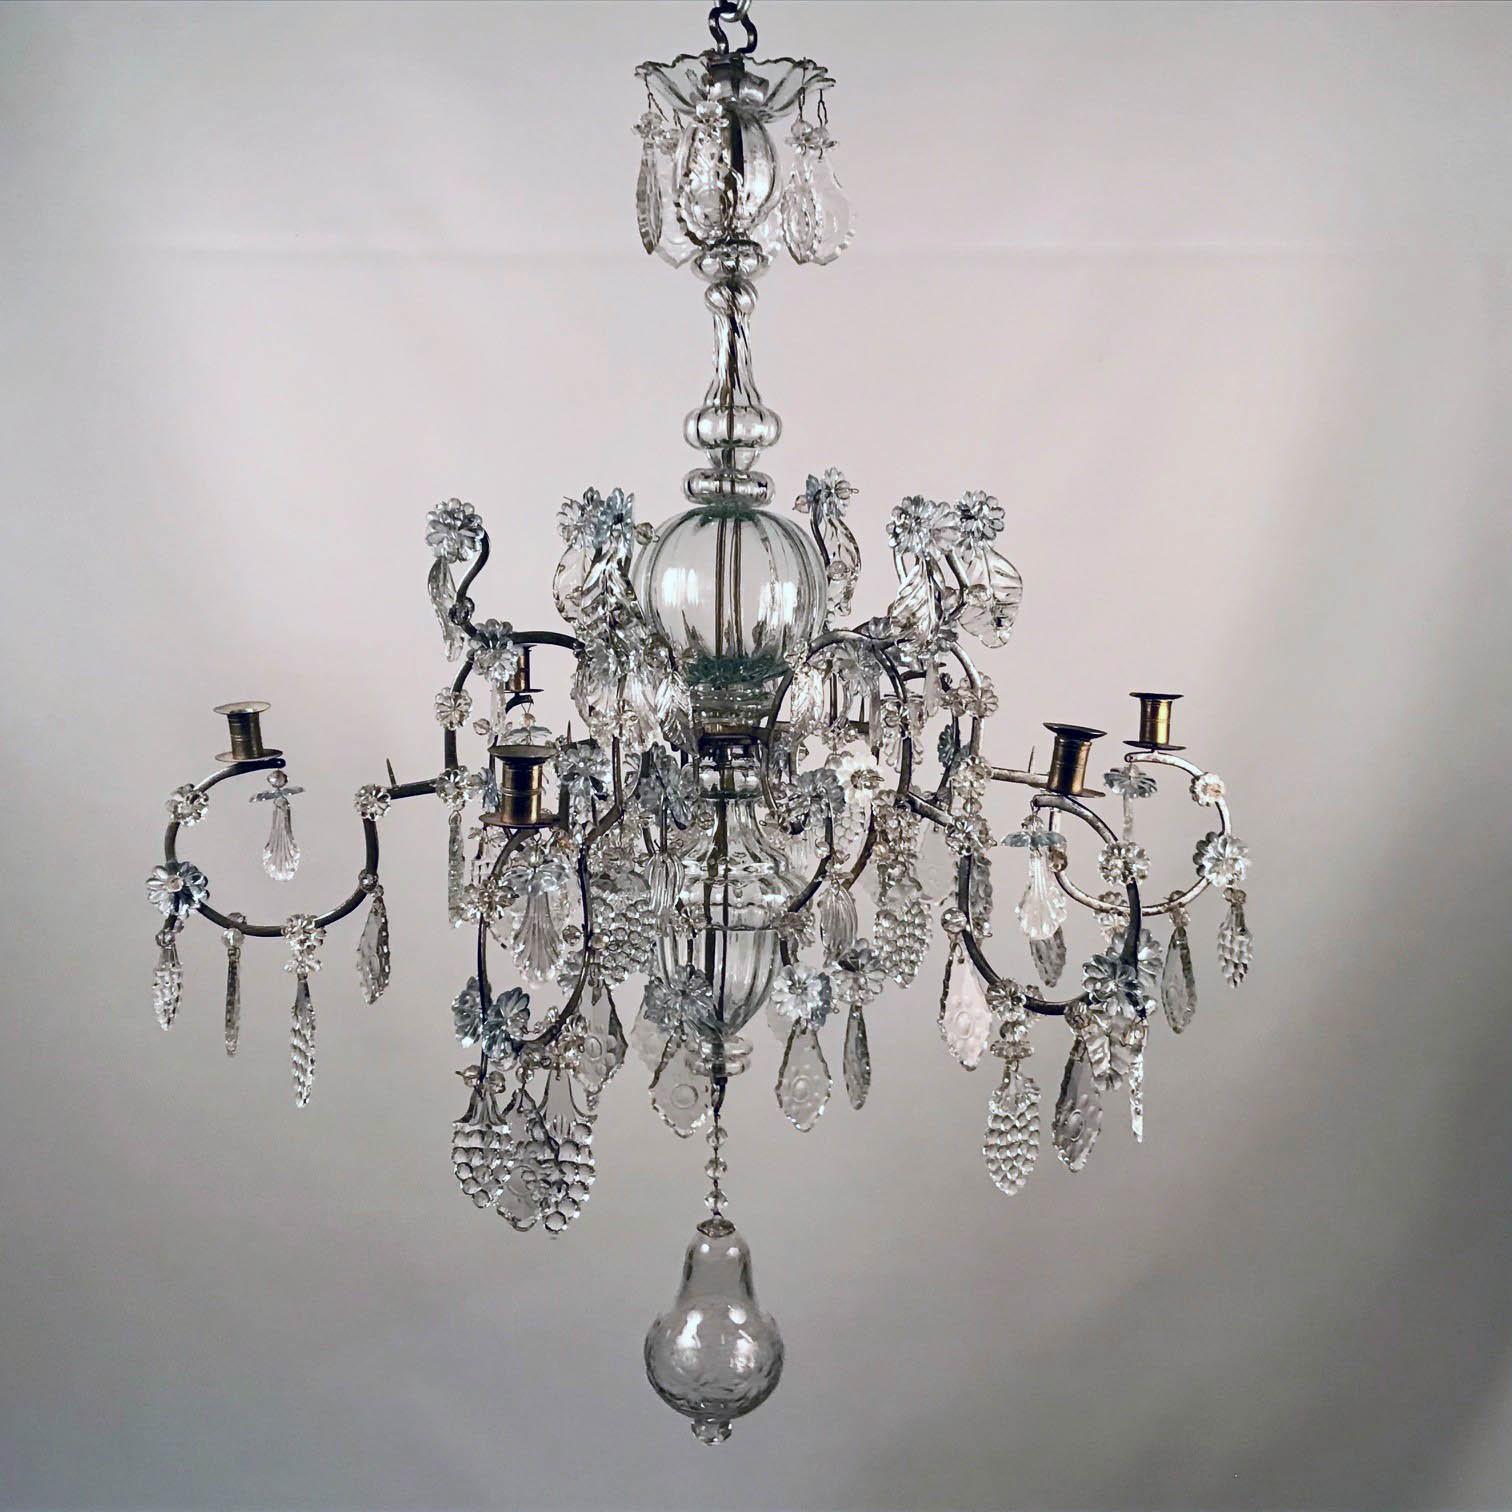 Baltic 18th Century Crystal and Iron Candle Chandelier In Good Condition For Sale In Montreal, QC